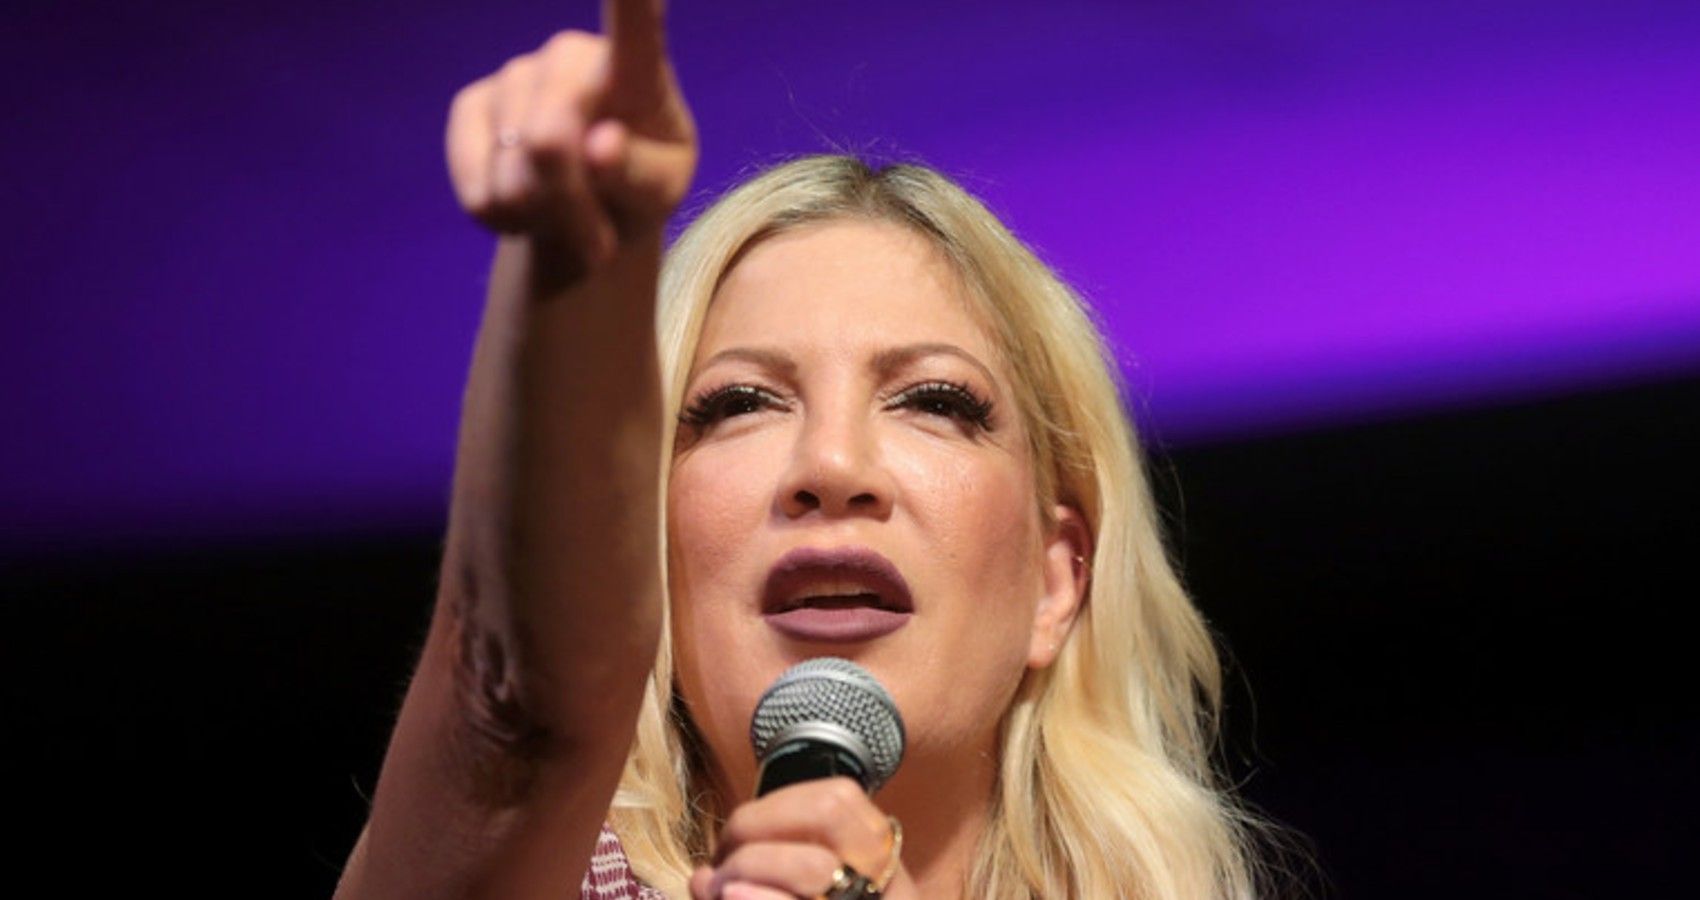 Tori Spelling Calls Out Paparazzi Who Were At Child's School